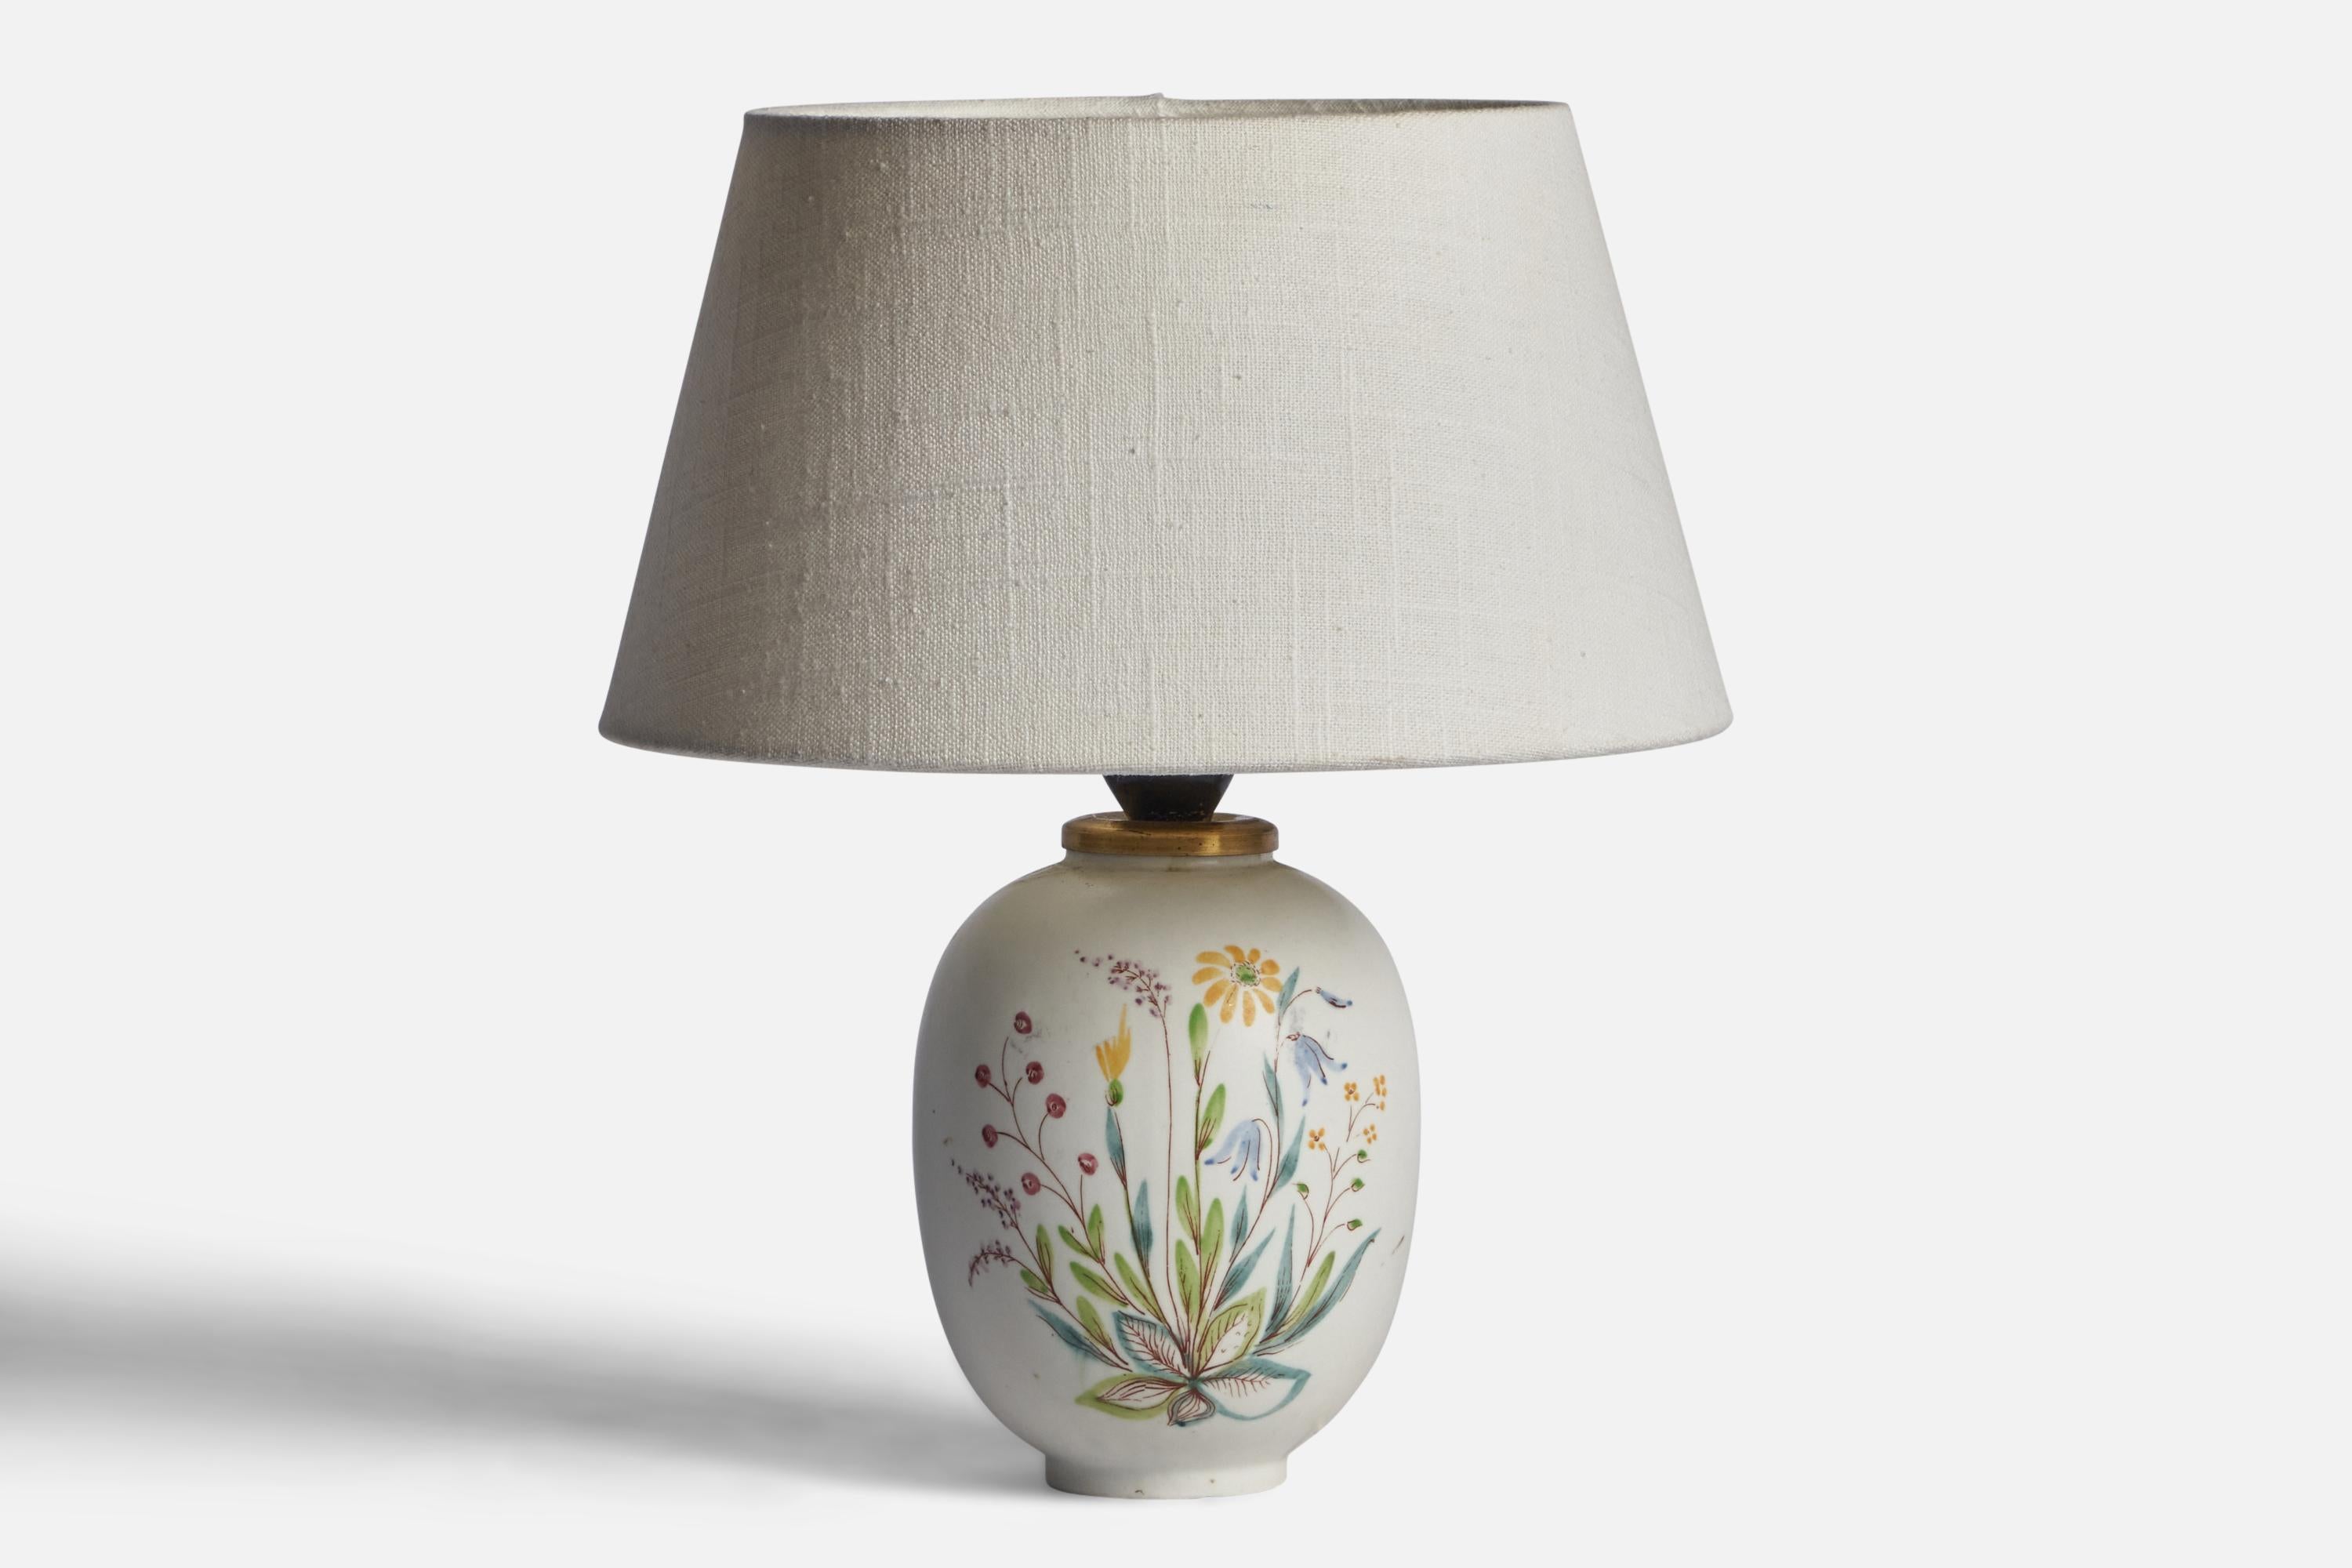 A white-glazed and hand-painted stoneware and brass table lamp designed and produced by Rörstrand, Sweden, c. 1950s.

Dimensions of Lamp (inches): 9.25” H x 4.5” Diameter
Dimensions of Shade (inches): 7” Top Diameter x 10” Bottom Diameter x